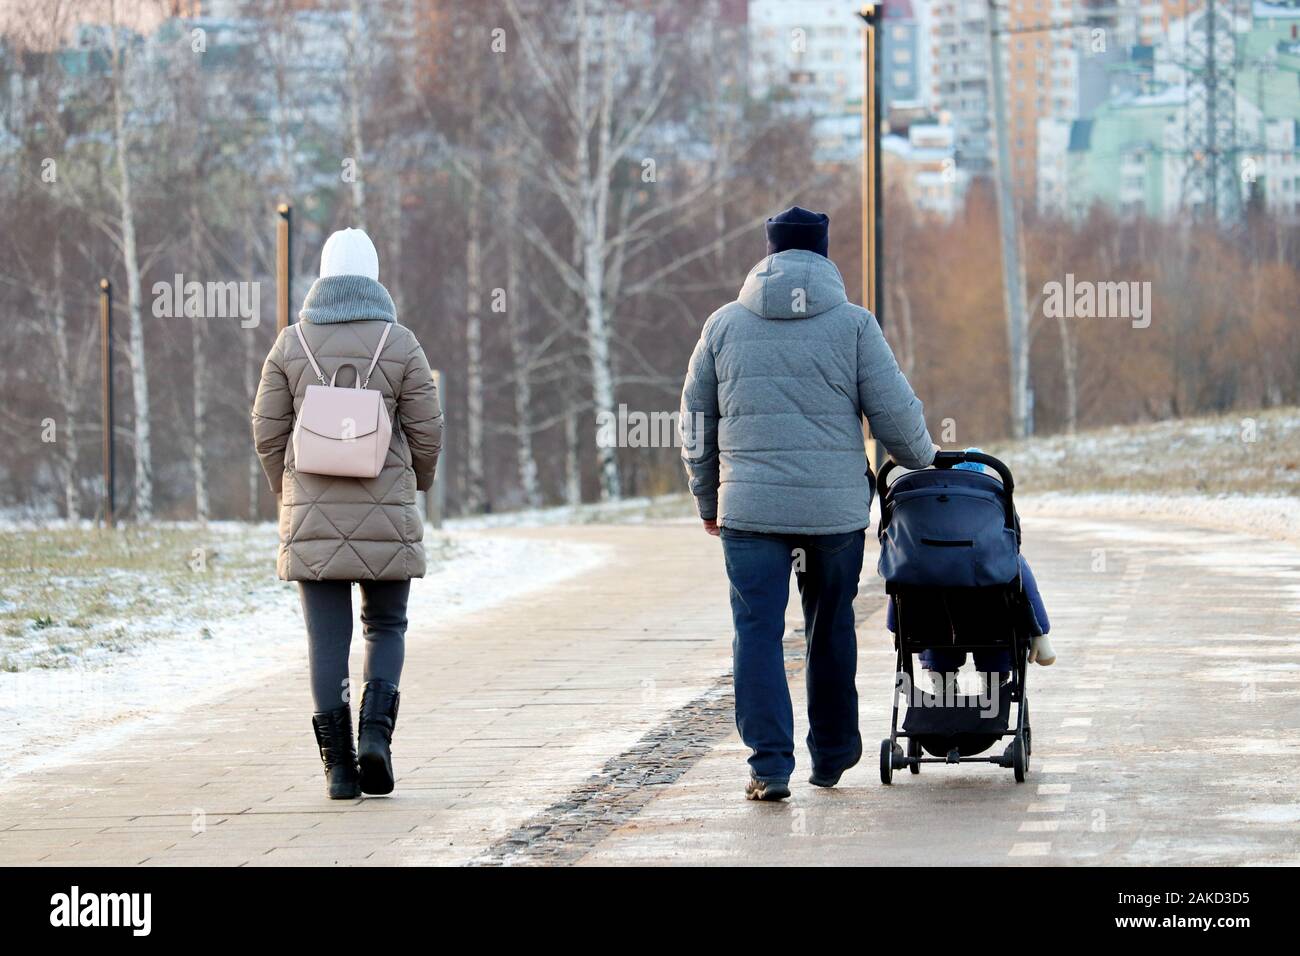 Couple with a baby stroller walking in winter park during. Snowy weather, concept of motherhood, parents with pram Stock Photo